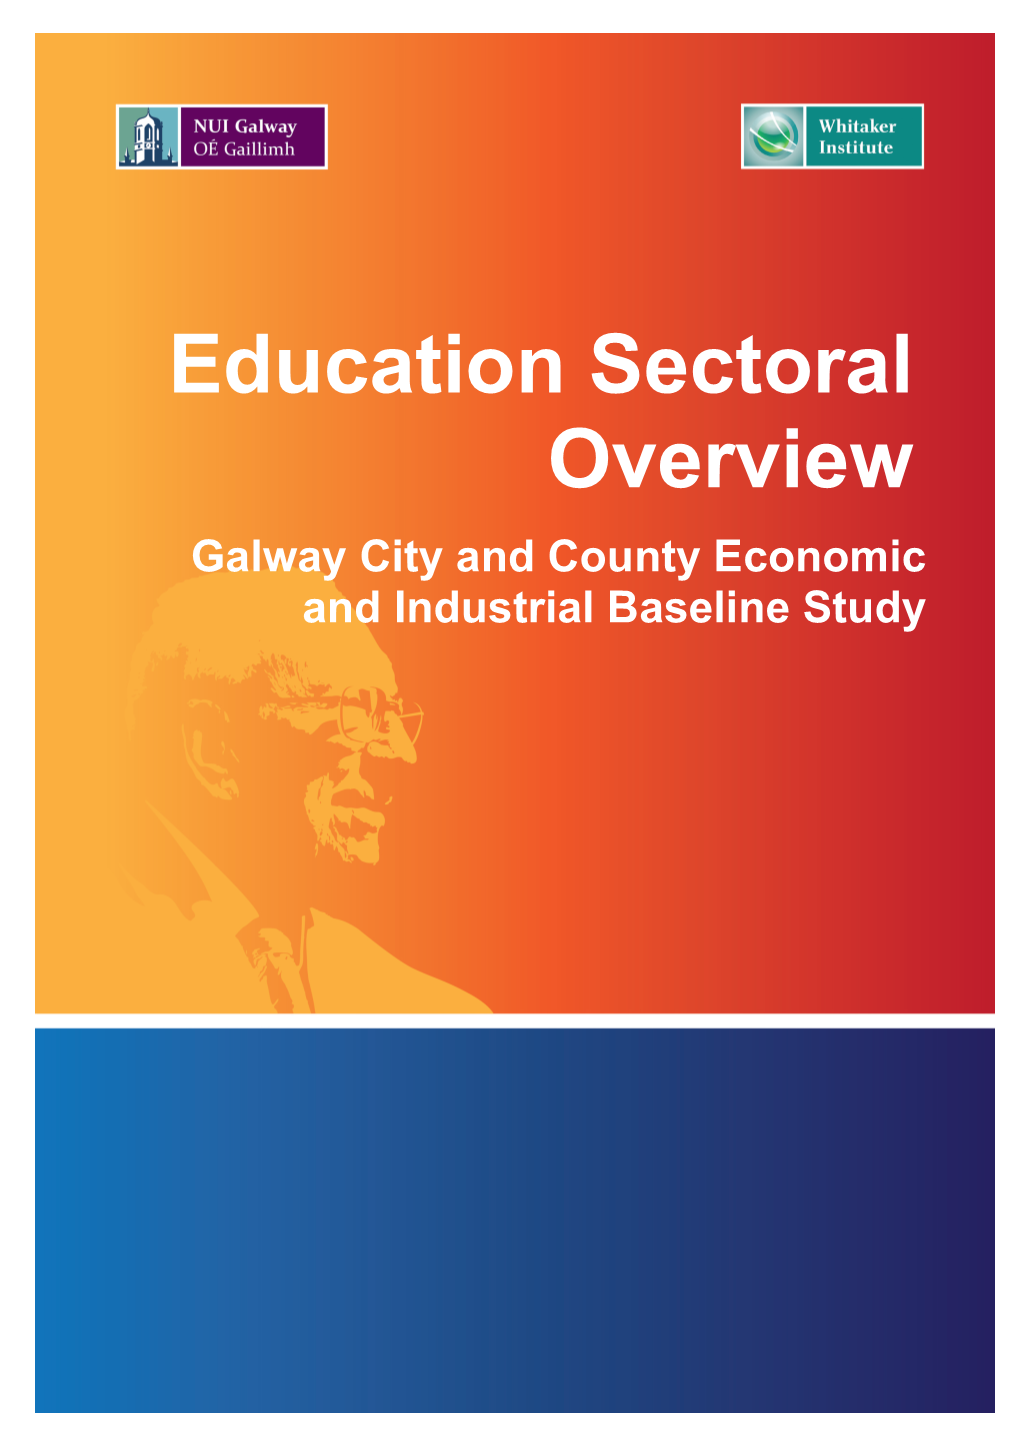 Education Sectoral Overview Galway City and County Economic and Industrial Baseline Study